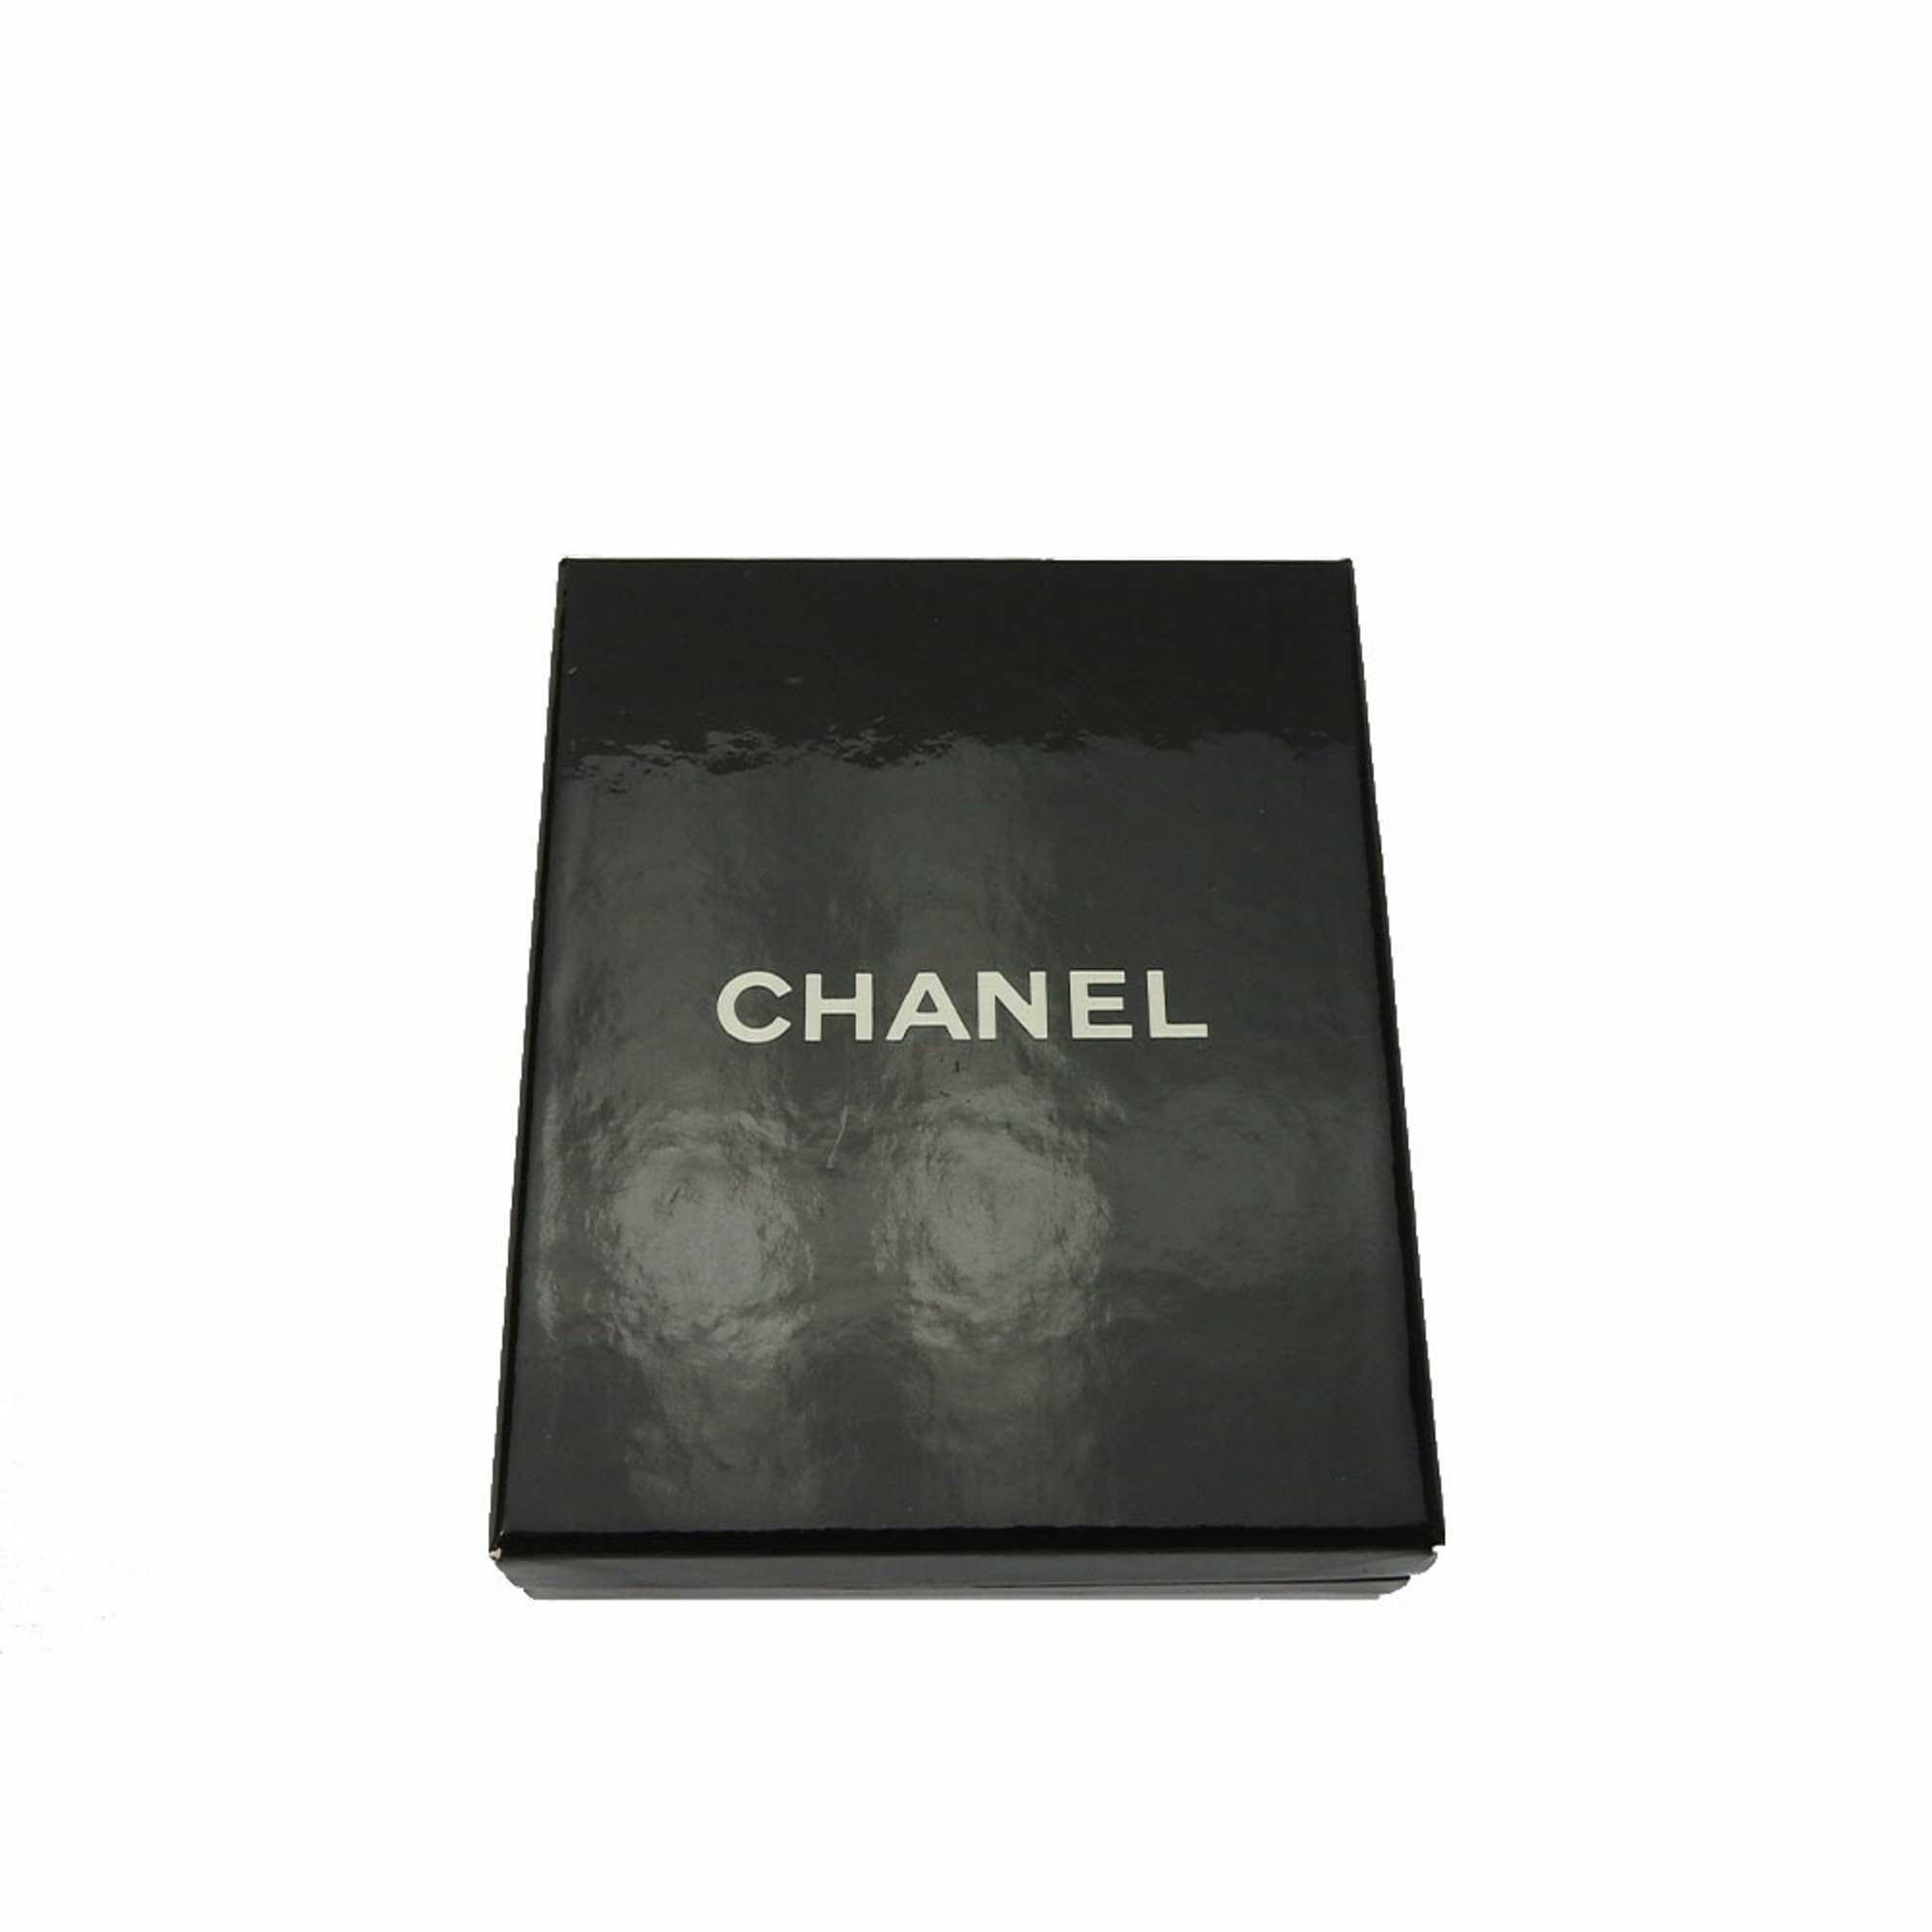 CHANEL Necklace Metal Gold GP Coco Mark Women's